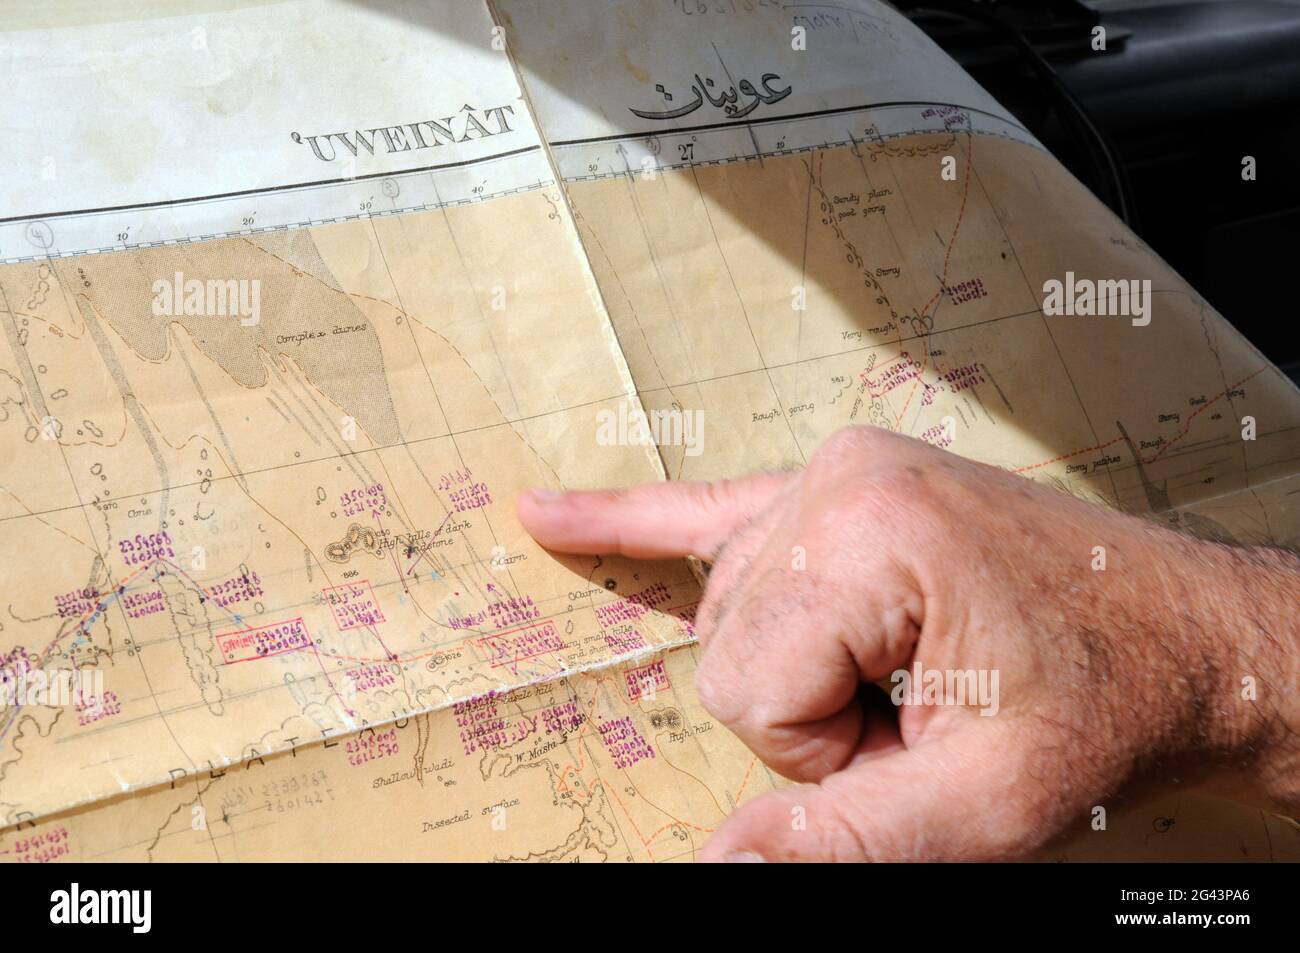 A desert safari leader plans his route on a map of the Gilf Kebir and Jebel Uweinat area of the Sahara Desert, in the Western Desert region of Egypt. Stock Photo